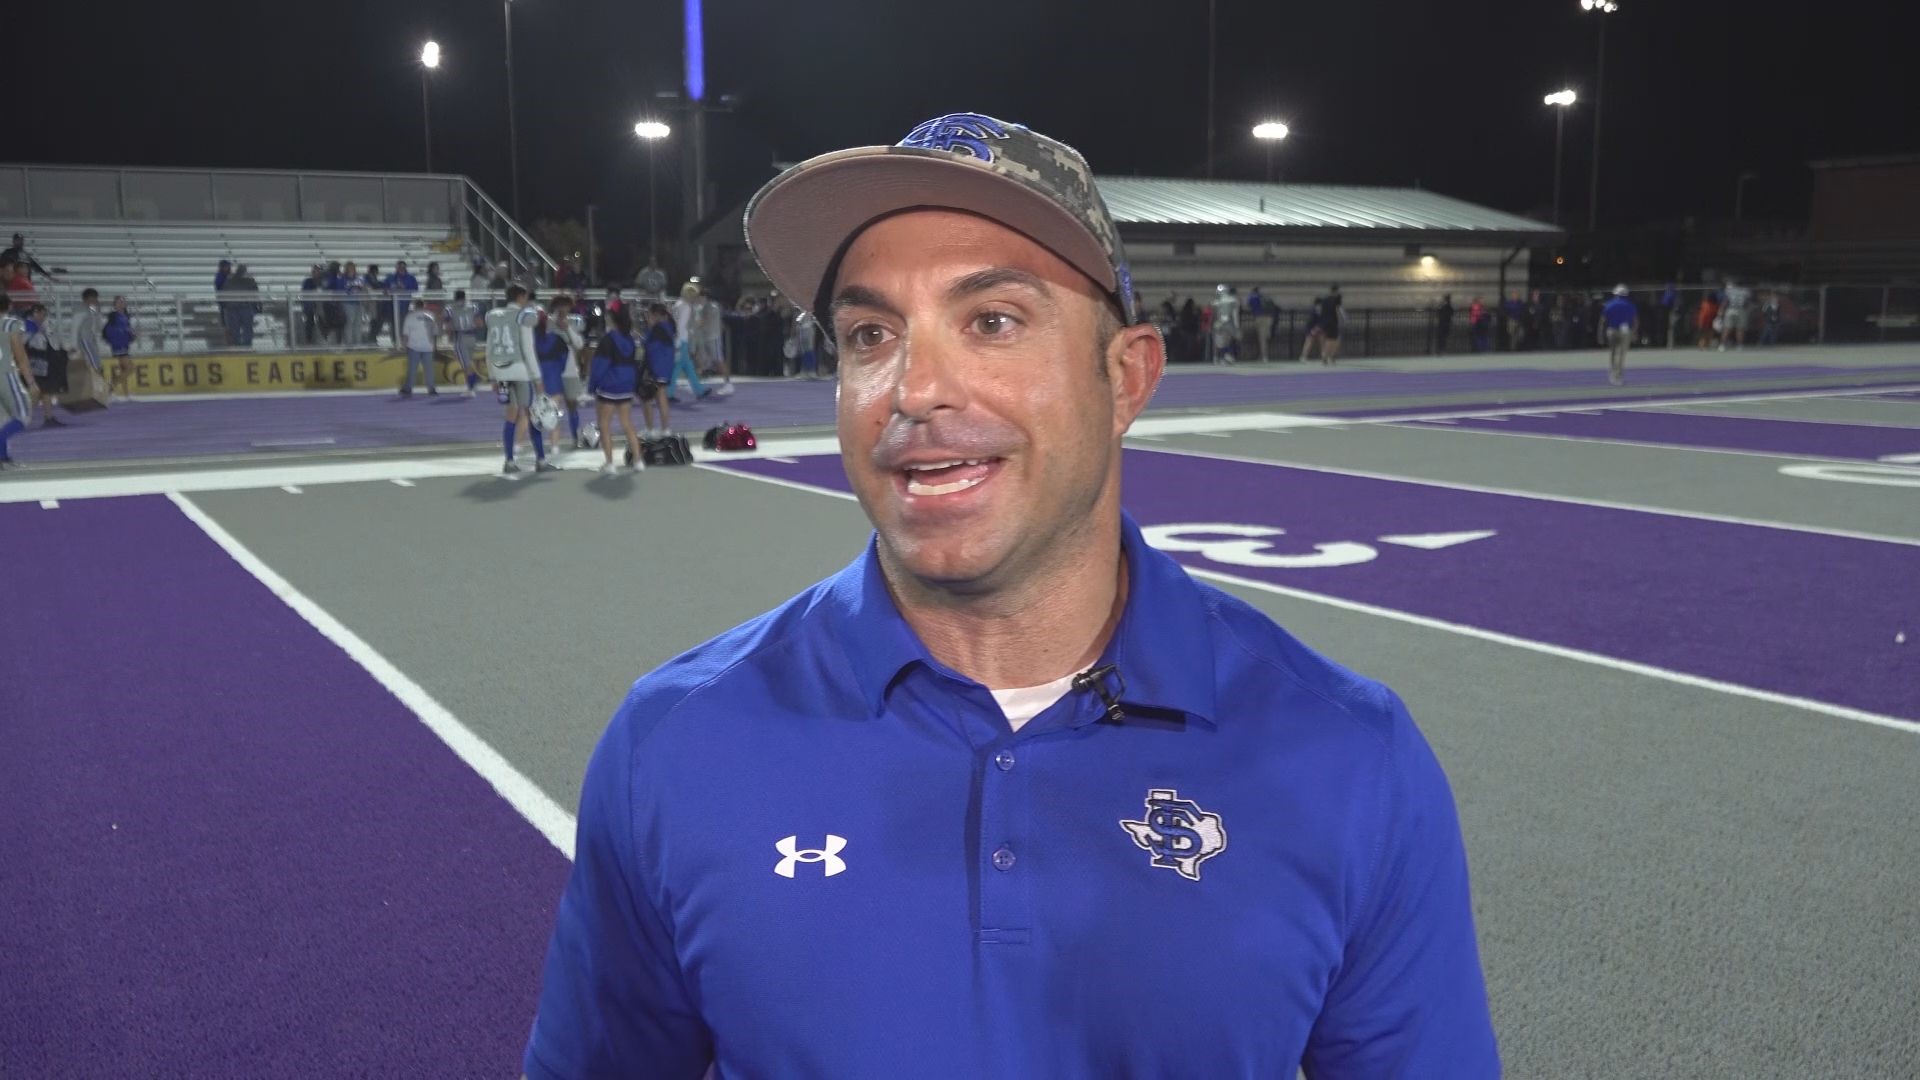 NewsWest 9 spoke with Fort Stockton's Head Coach Jeremy Hickman after Week 10.